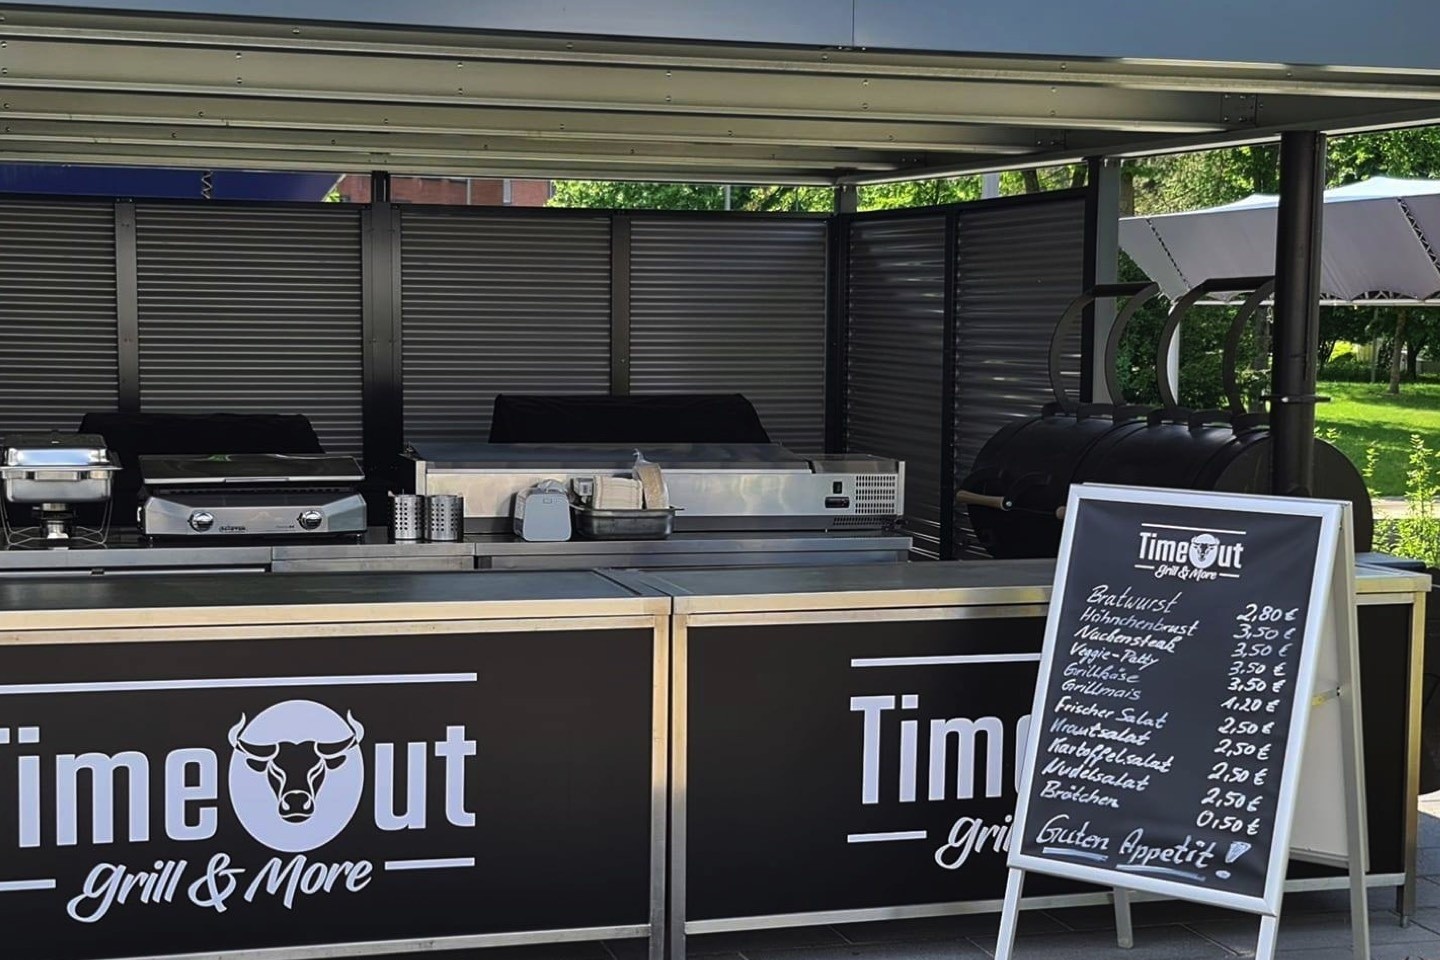 Time Out,Grill,More,Warendorf,Gastronomie,Andy Ullwer, Bratwurst,Steak,Burger,Kneipe,Terrasse,